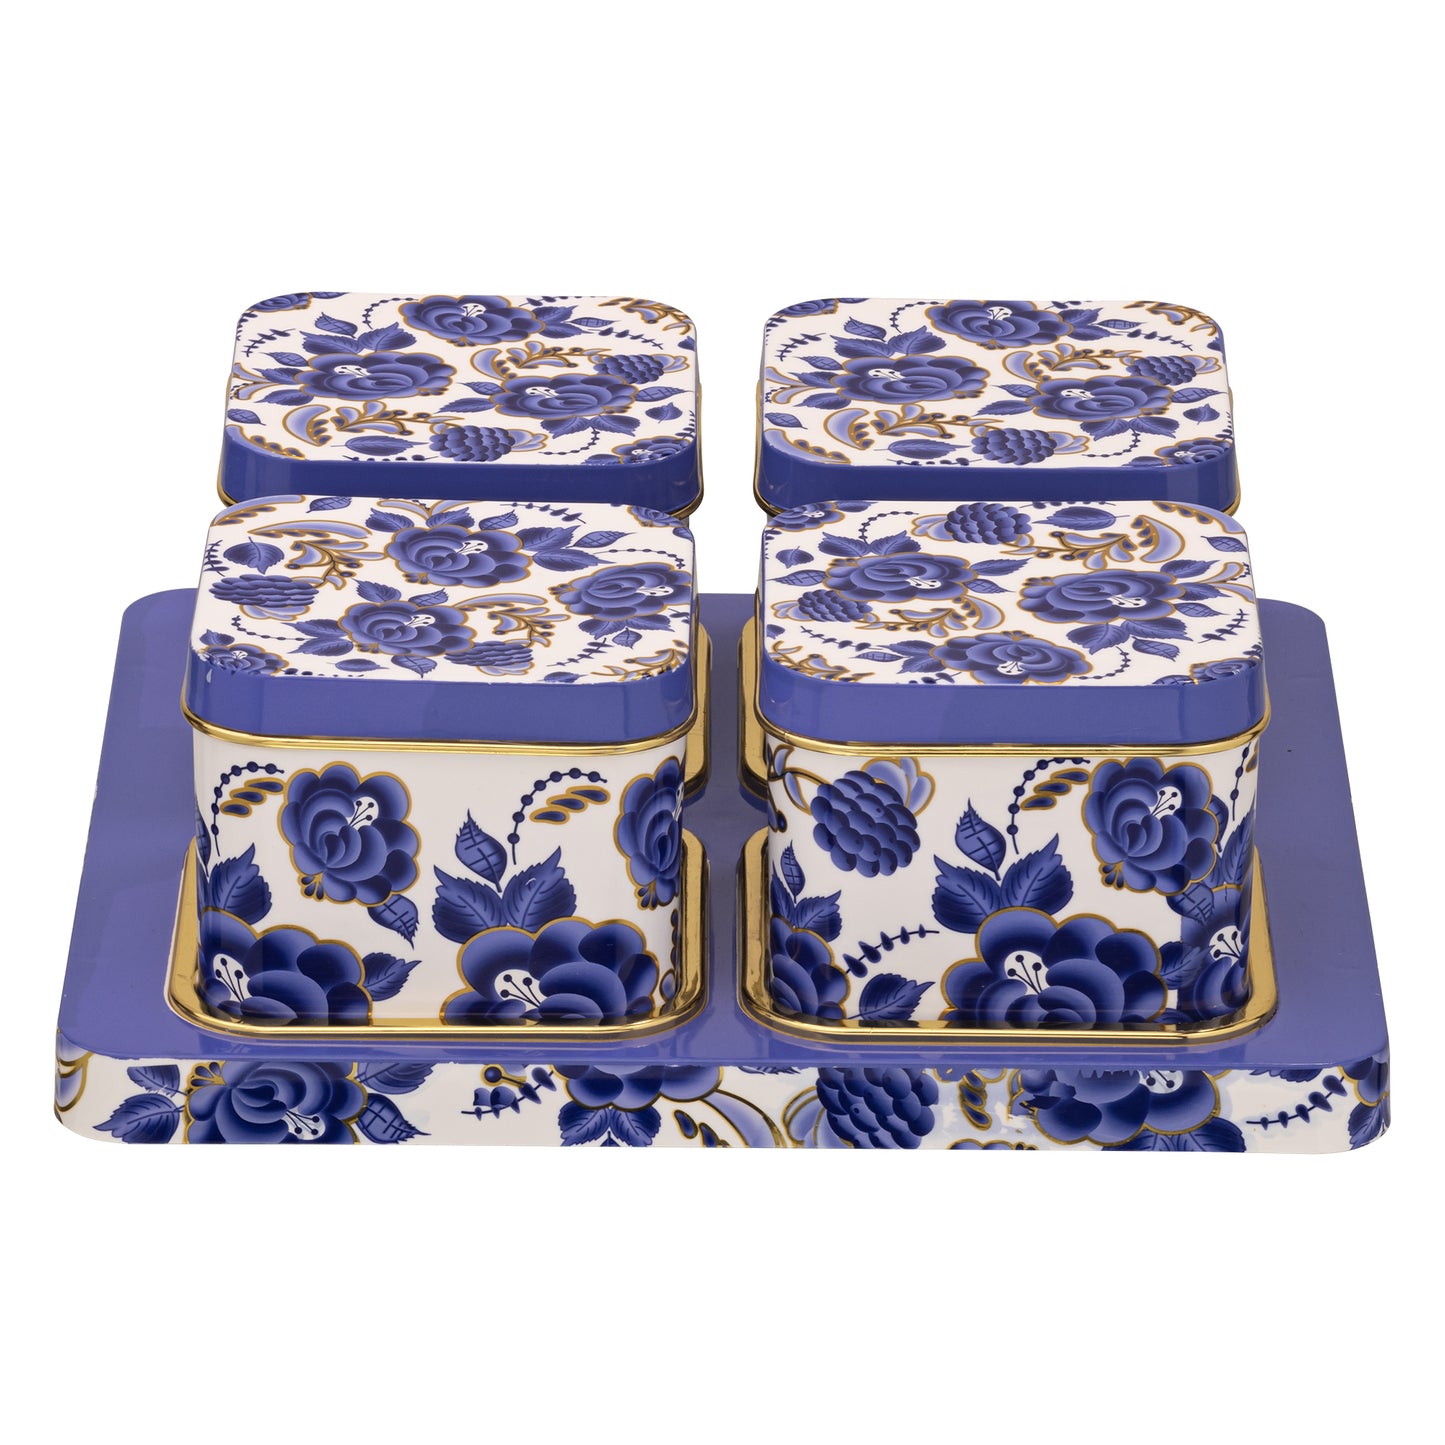 SELVEL Coral Serving Set - 4-Piece Blue Airtight Dry Fruit Container Tray Set with Lid & Serving Tray